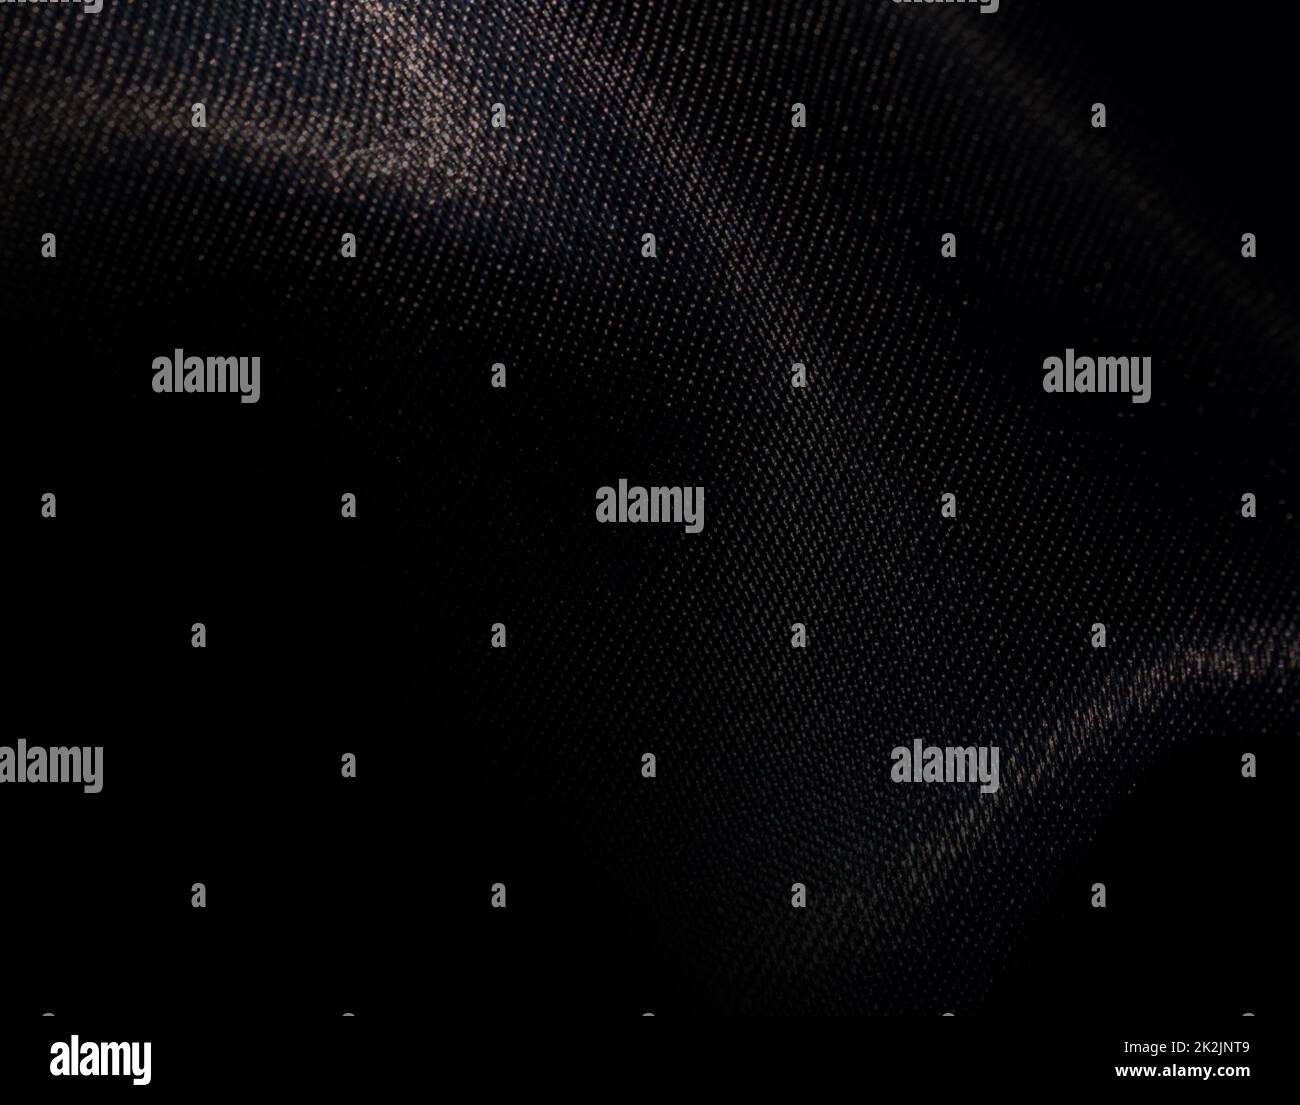 Black shiny polyester fabric background for graphic design, banner, poster. Stock Photo